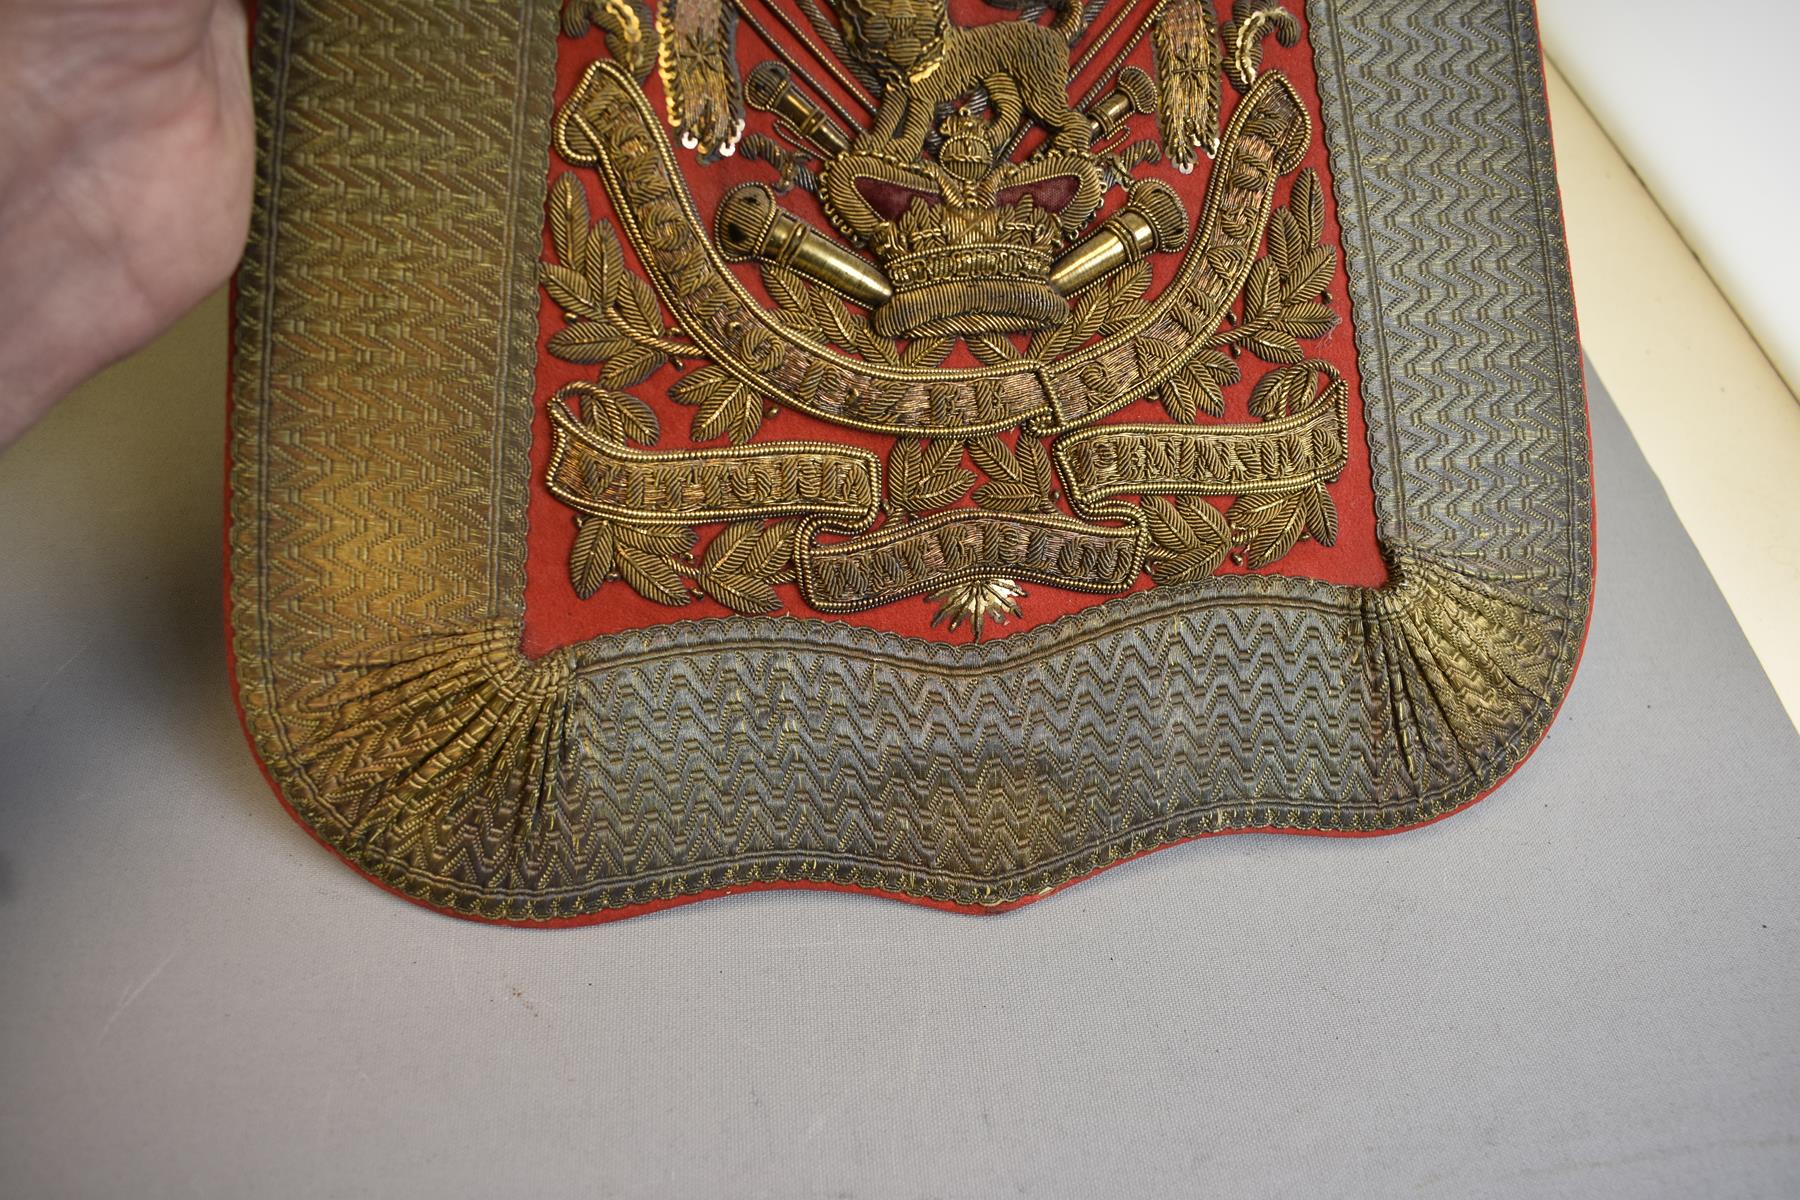 A FINE LARGE SIZE WILLIAM IV 15TH KING'S HUSSARS OFFICER'S SABRETACHE, the red felt flap with - Image 5 of 10